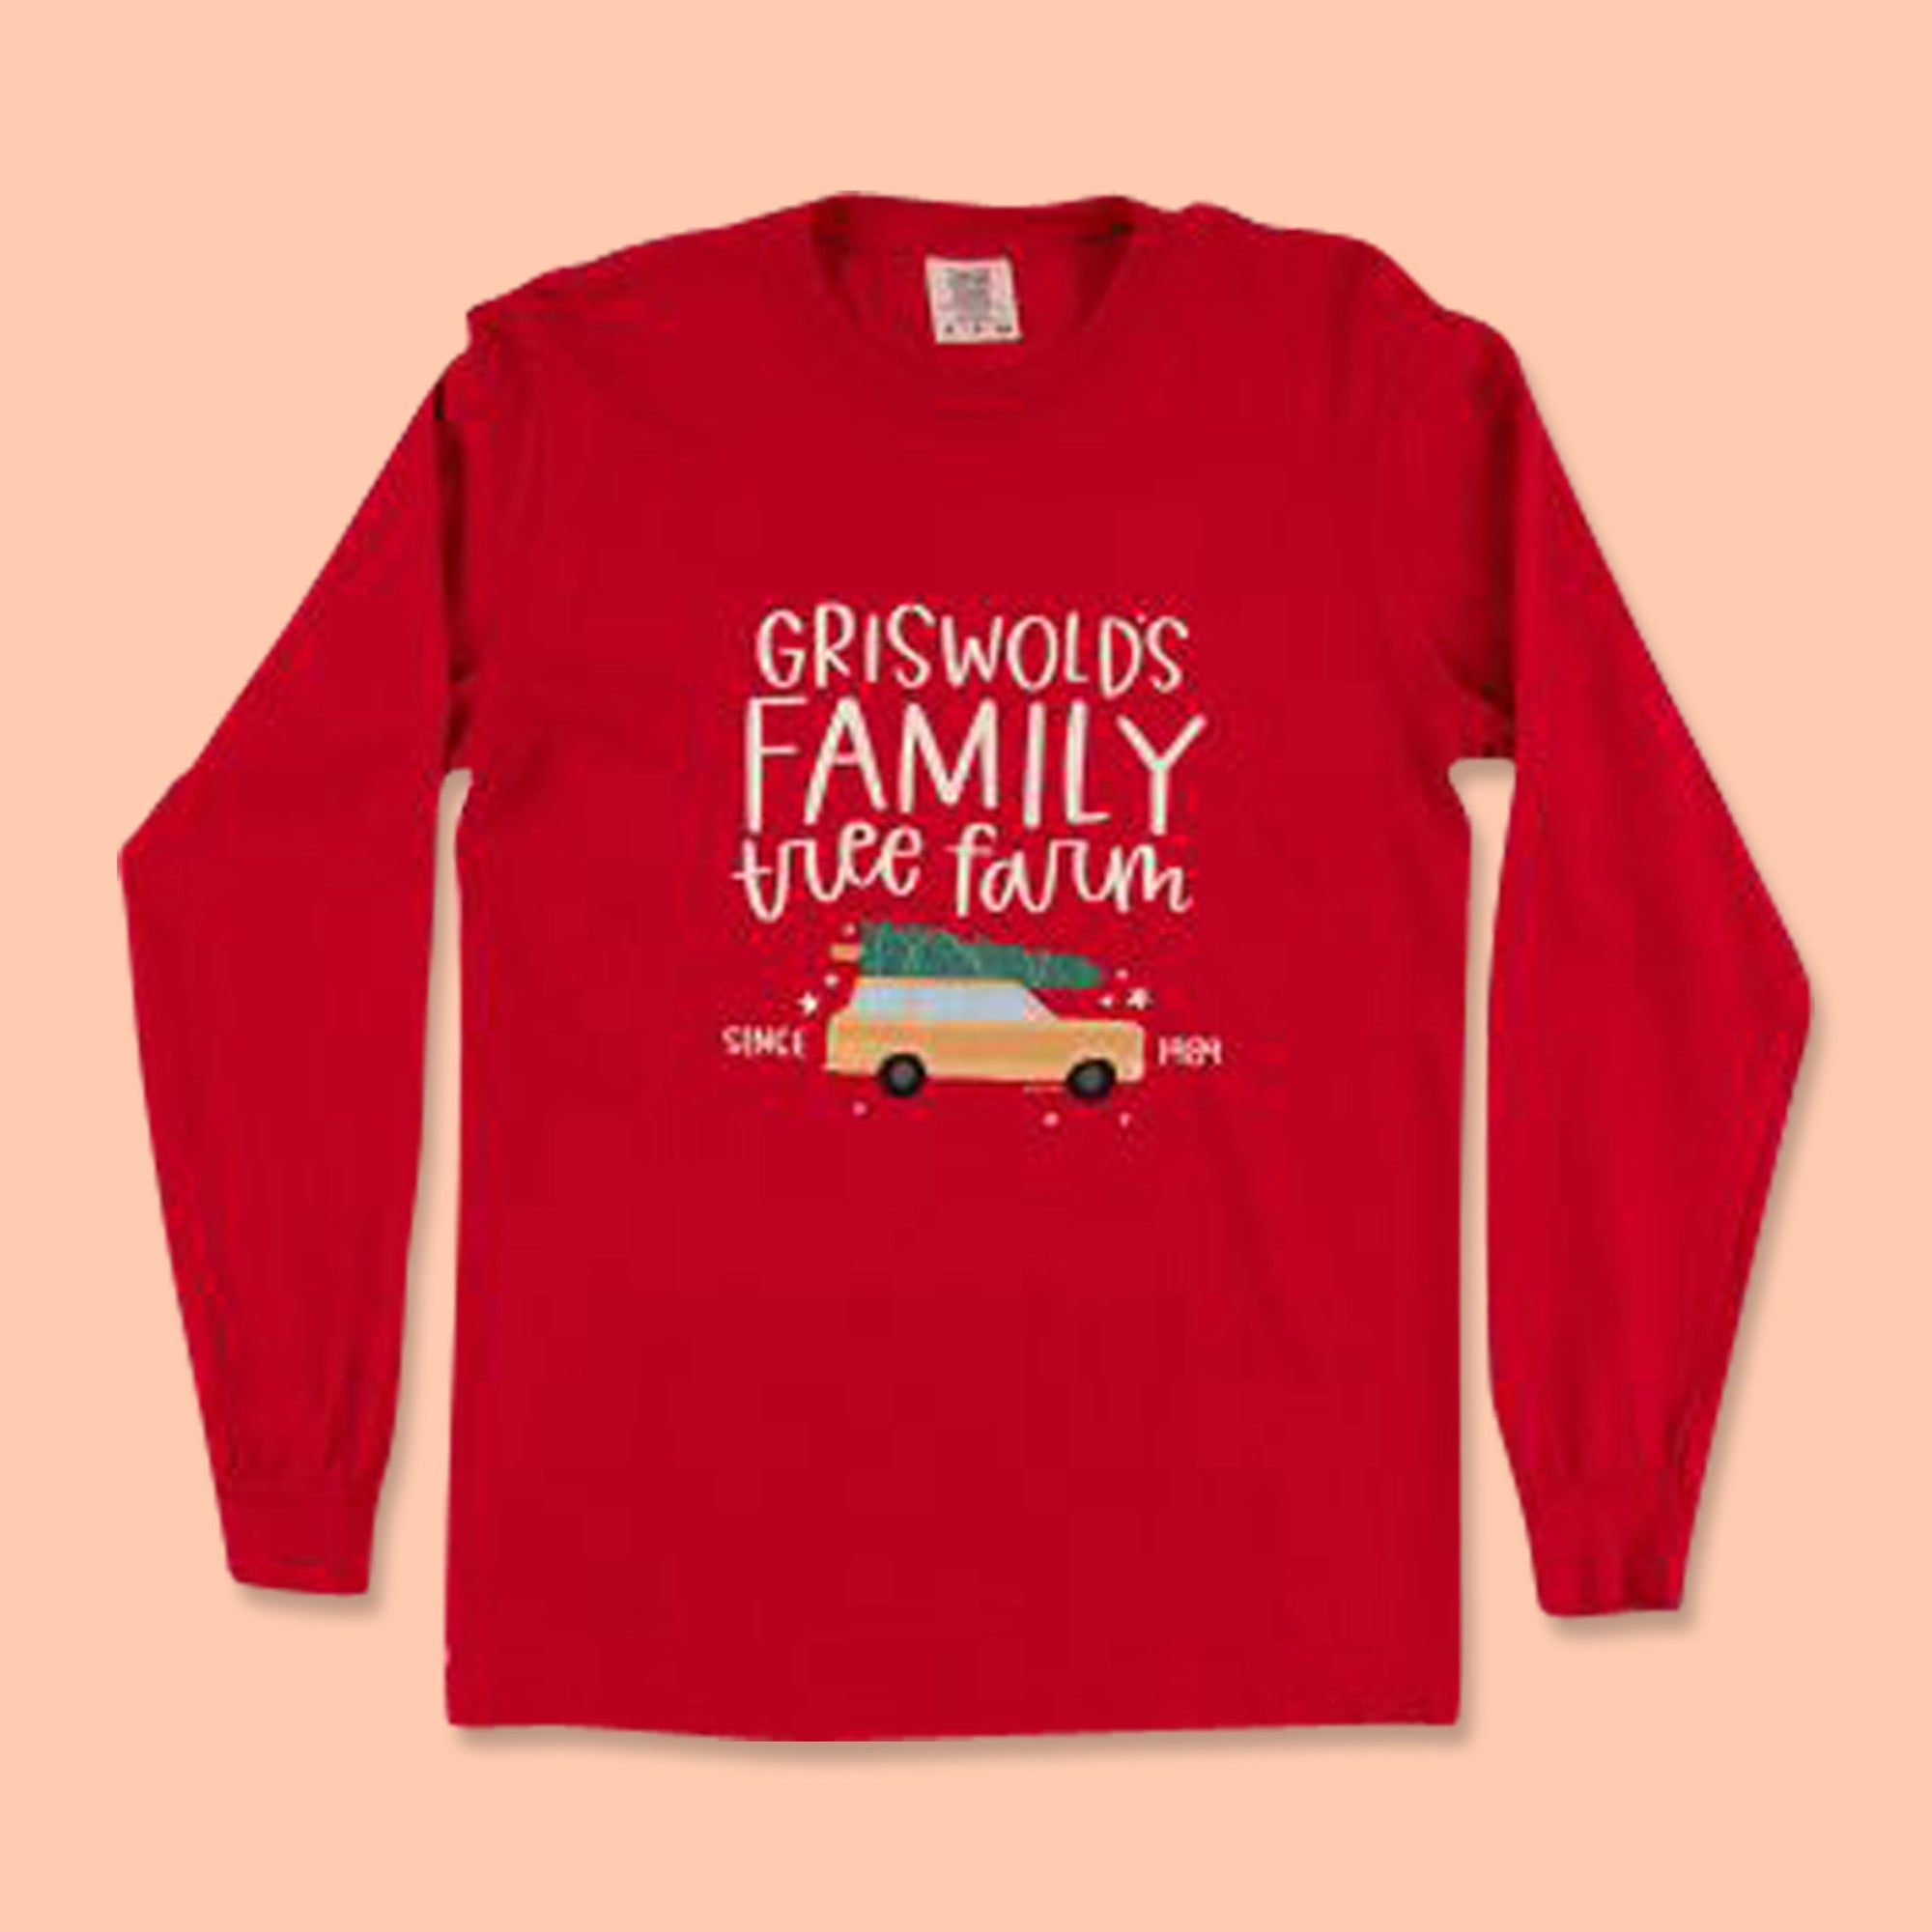 Griswold Family Tree Farm Long Sleeve Tee